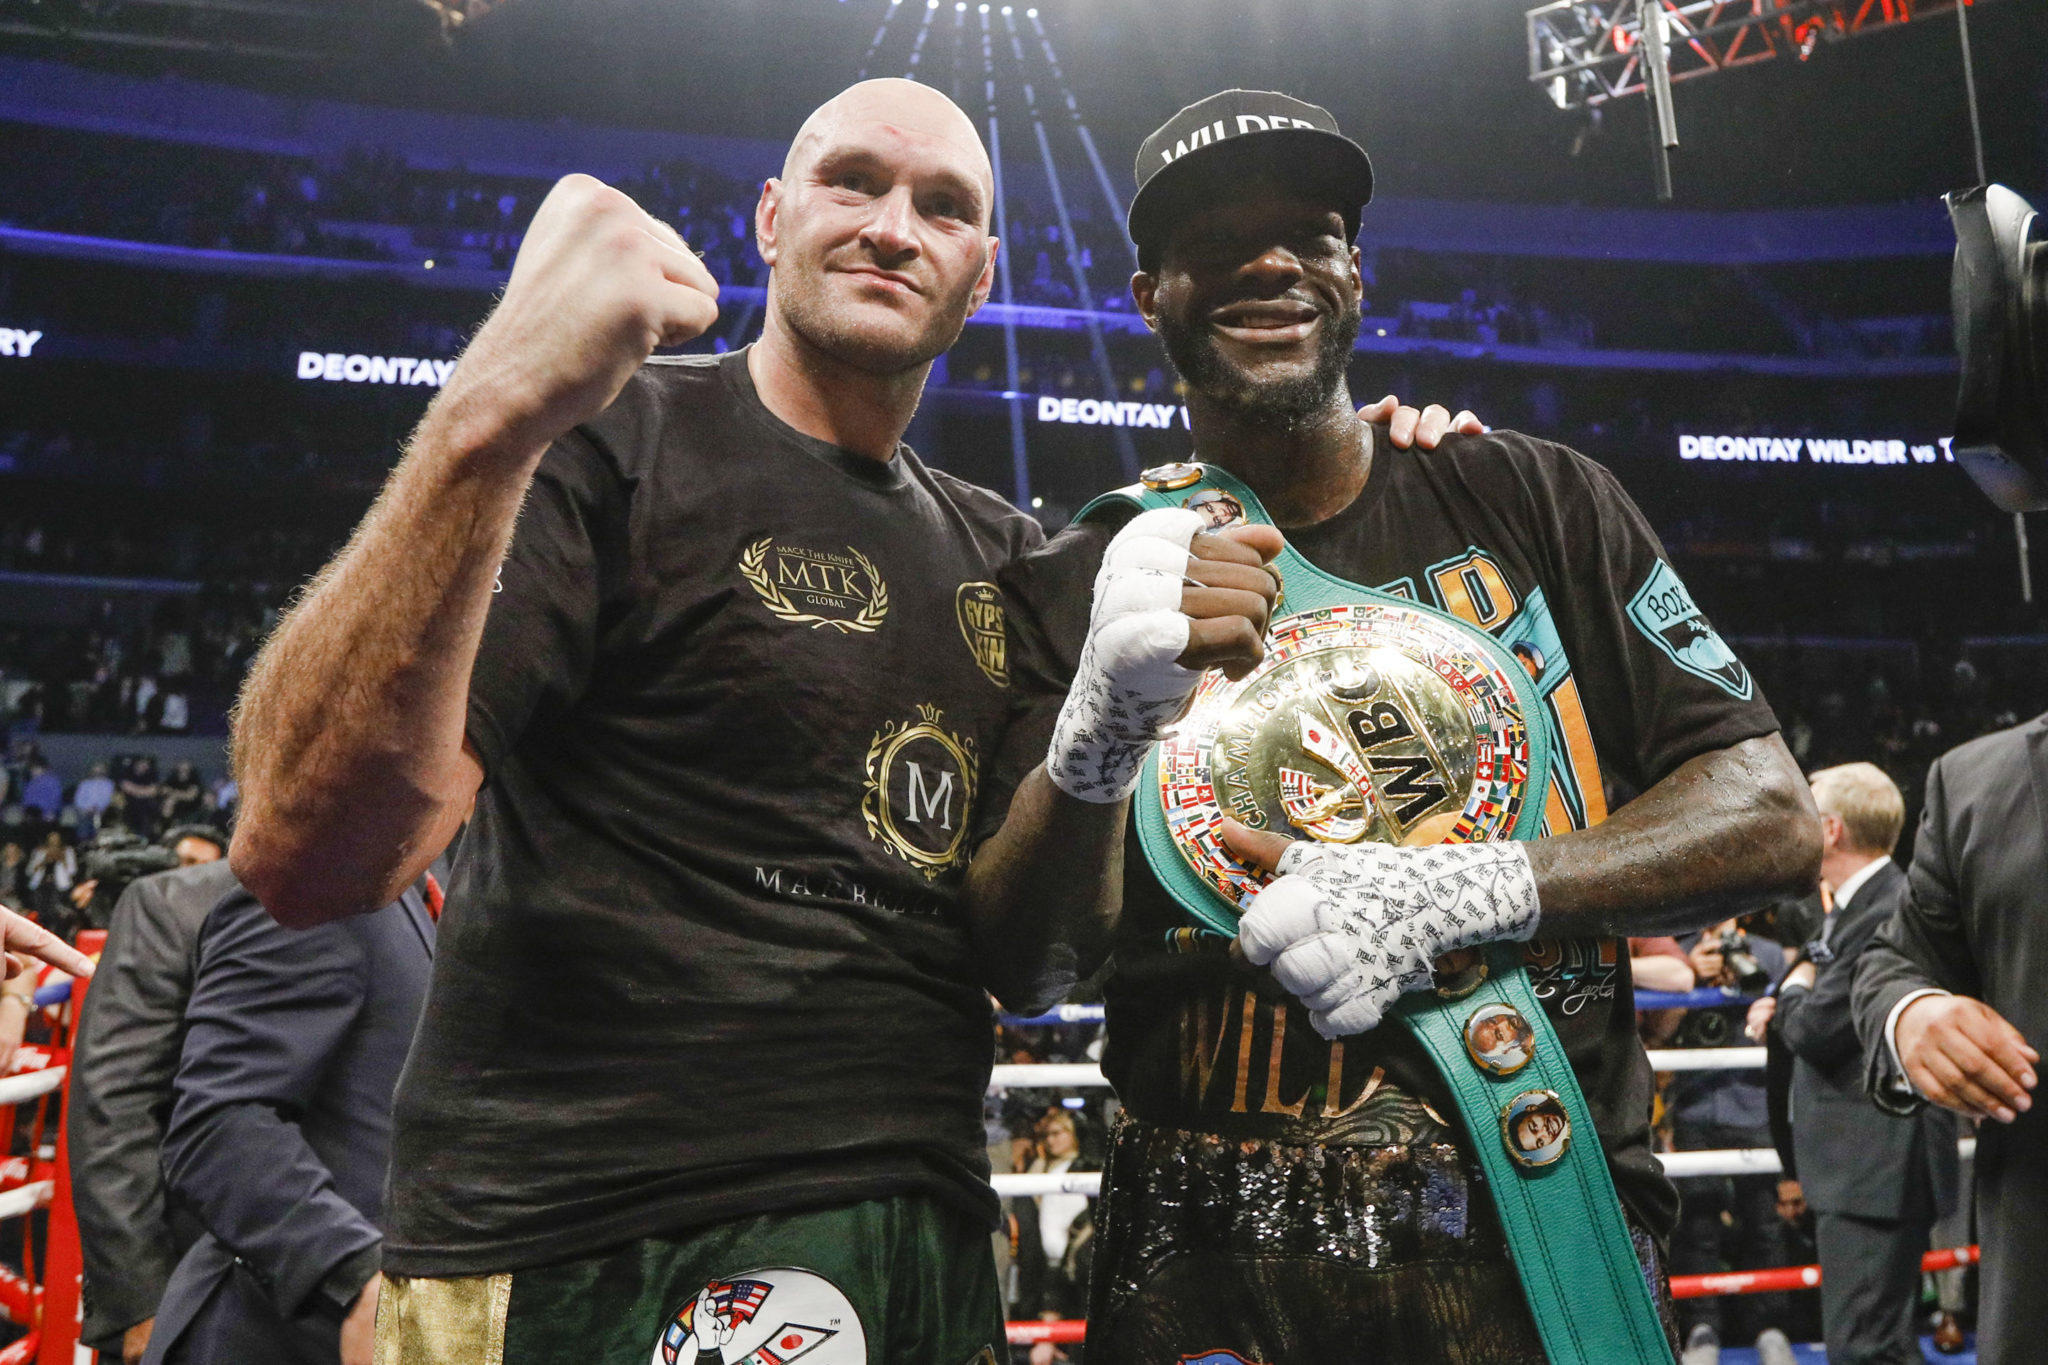 DEONTAY WILDER AND TYSON FURY FIGHT TO SPLIT-DECISION DRAW IN EPIC BATTLE ON/u200bu200bSHOWTIME PPV® FROM STAPLES CENTER IN LOS ANGELES